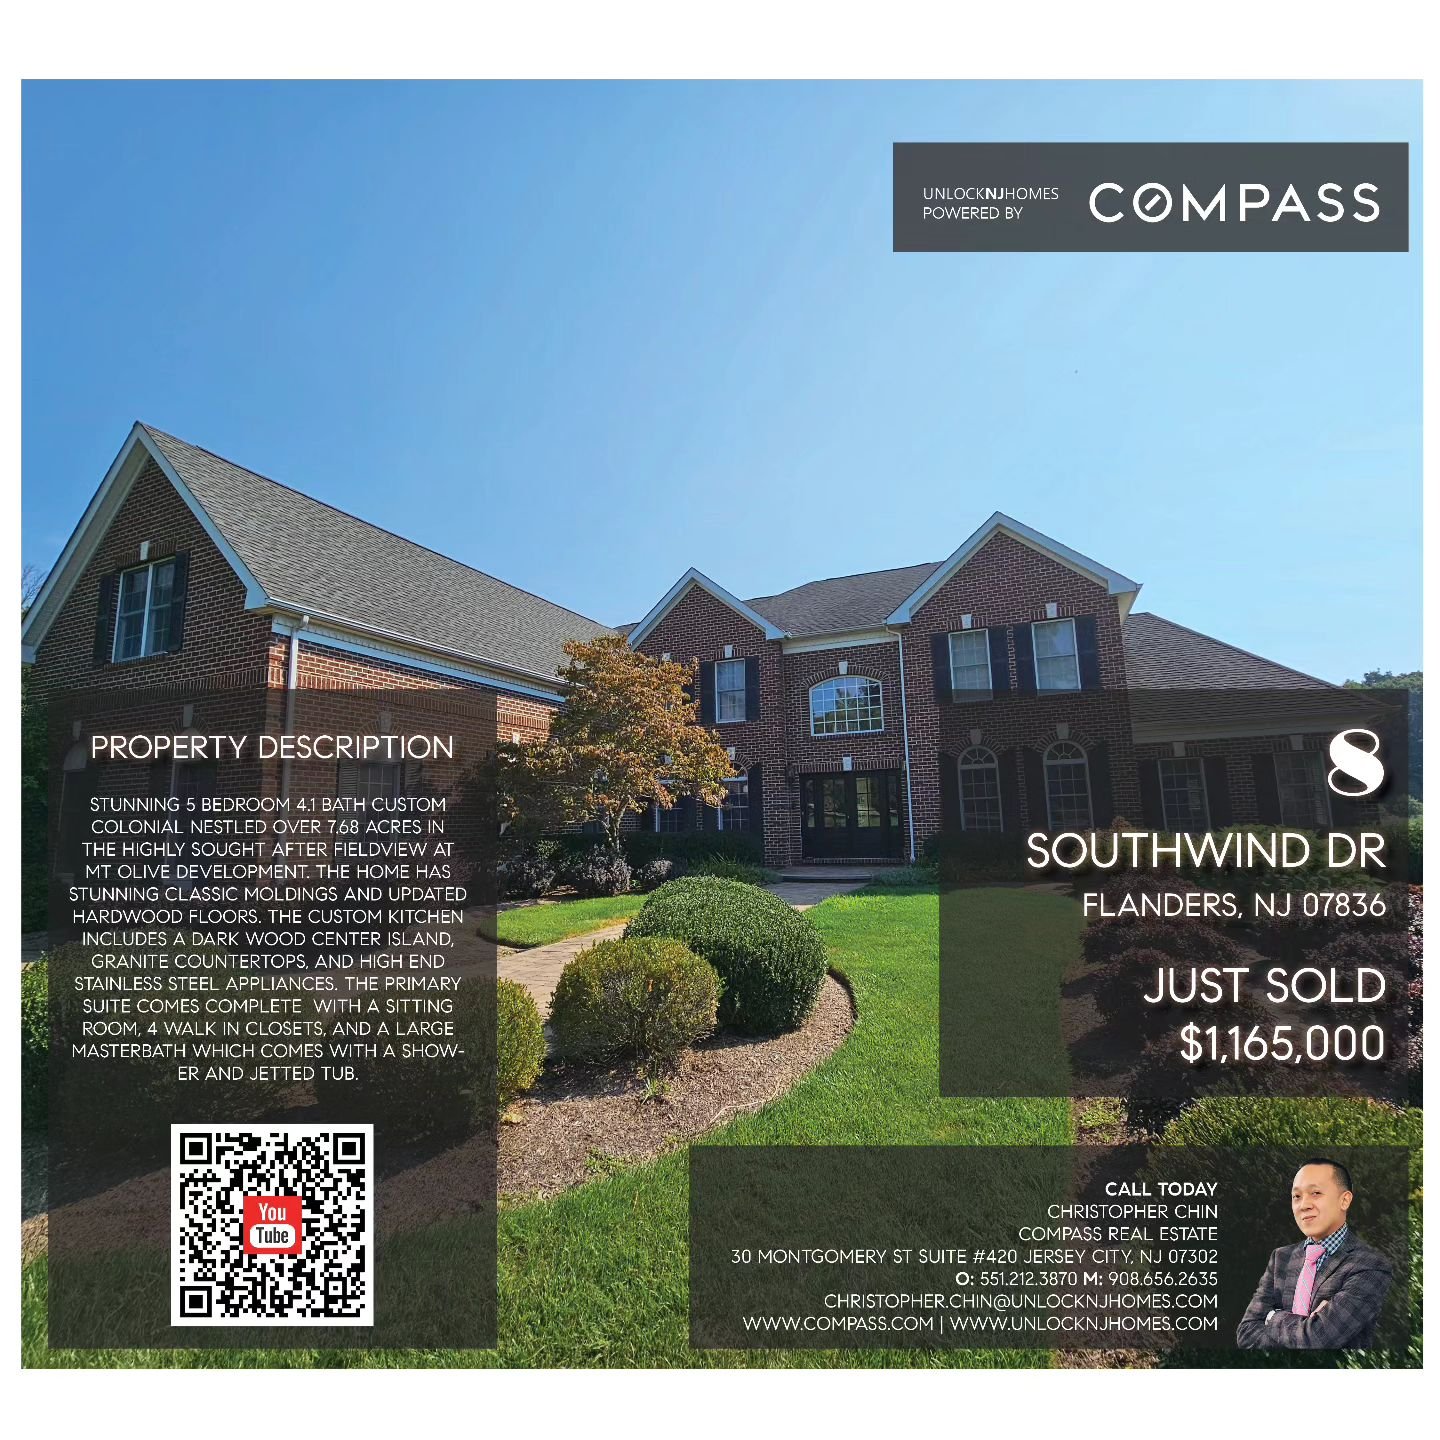 Recently Sold in September
8 Southwind Dr in Mount Olive
5 bedrooms 4.1 baths 7.68 Acres
Sold Price: $1,165,000

STUNNING 5 BEDROOM 4.1 BATH CUSTOM COLONIAL NESTLED OVER 7.68 ACRES IN THE HIGHLY SOUGHT AFTER FIELDVIEW AT MT OLIVE DEVELOPMENT. THE HOM